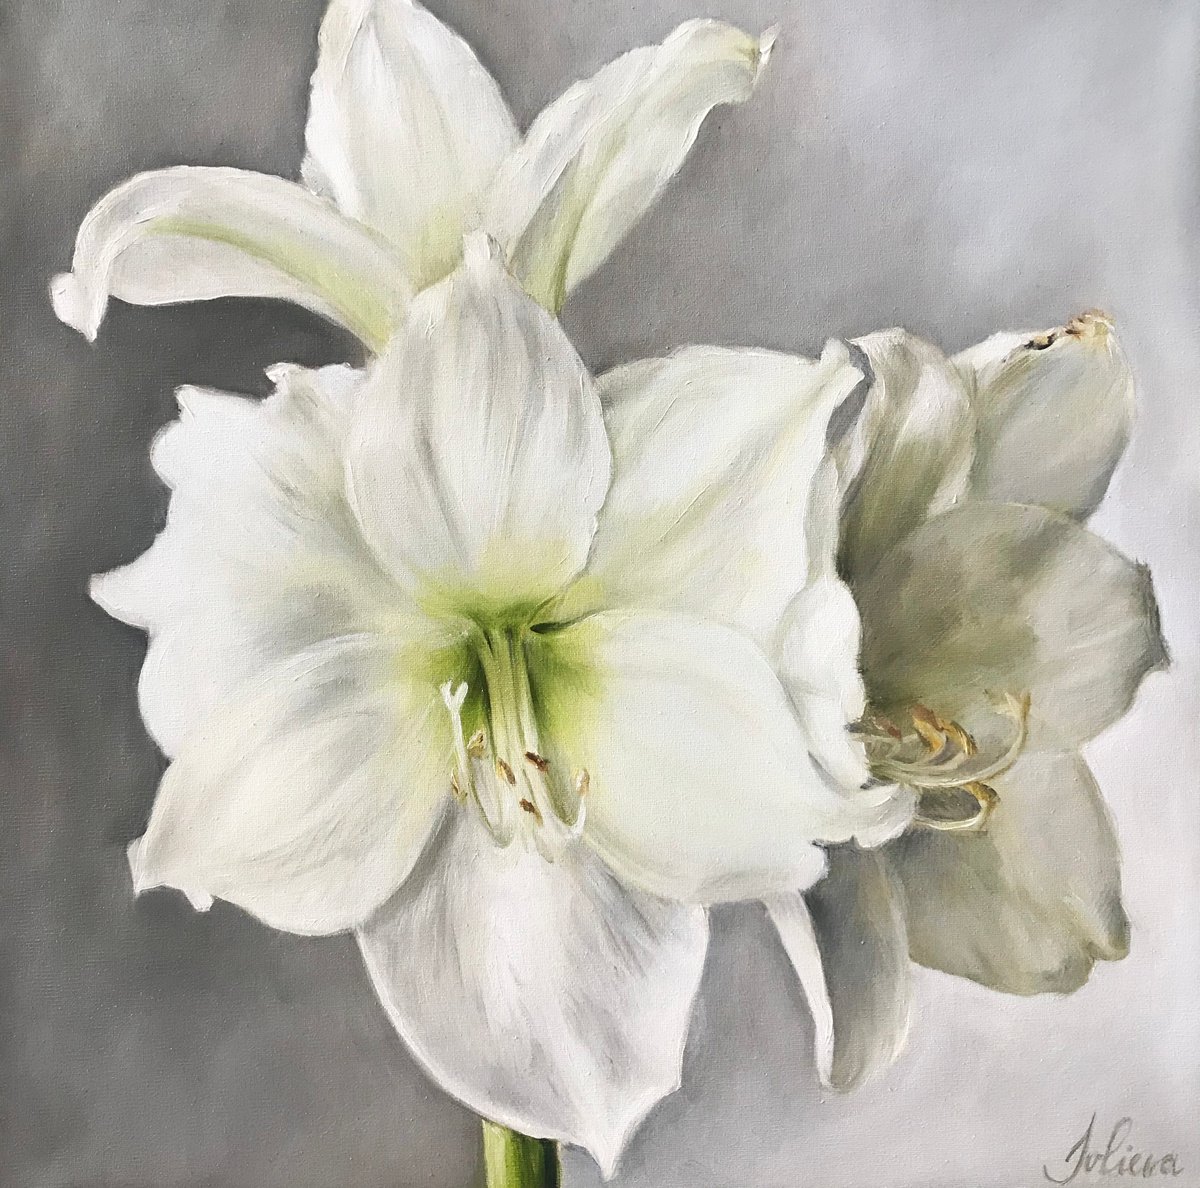 Oil painting with white flowers 30*30 cm by Irina Ivlieva